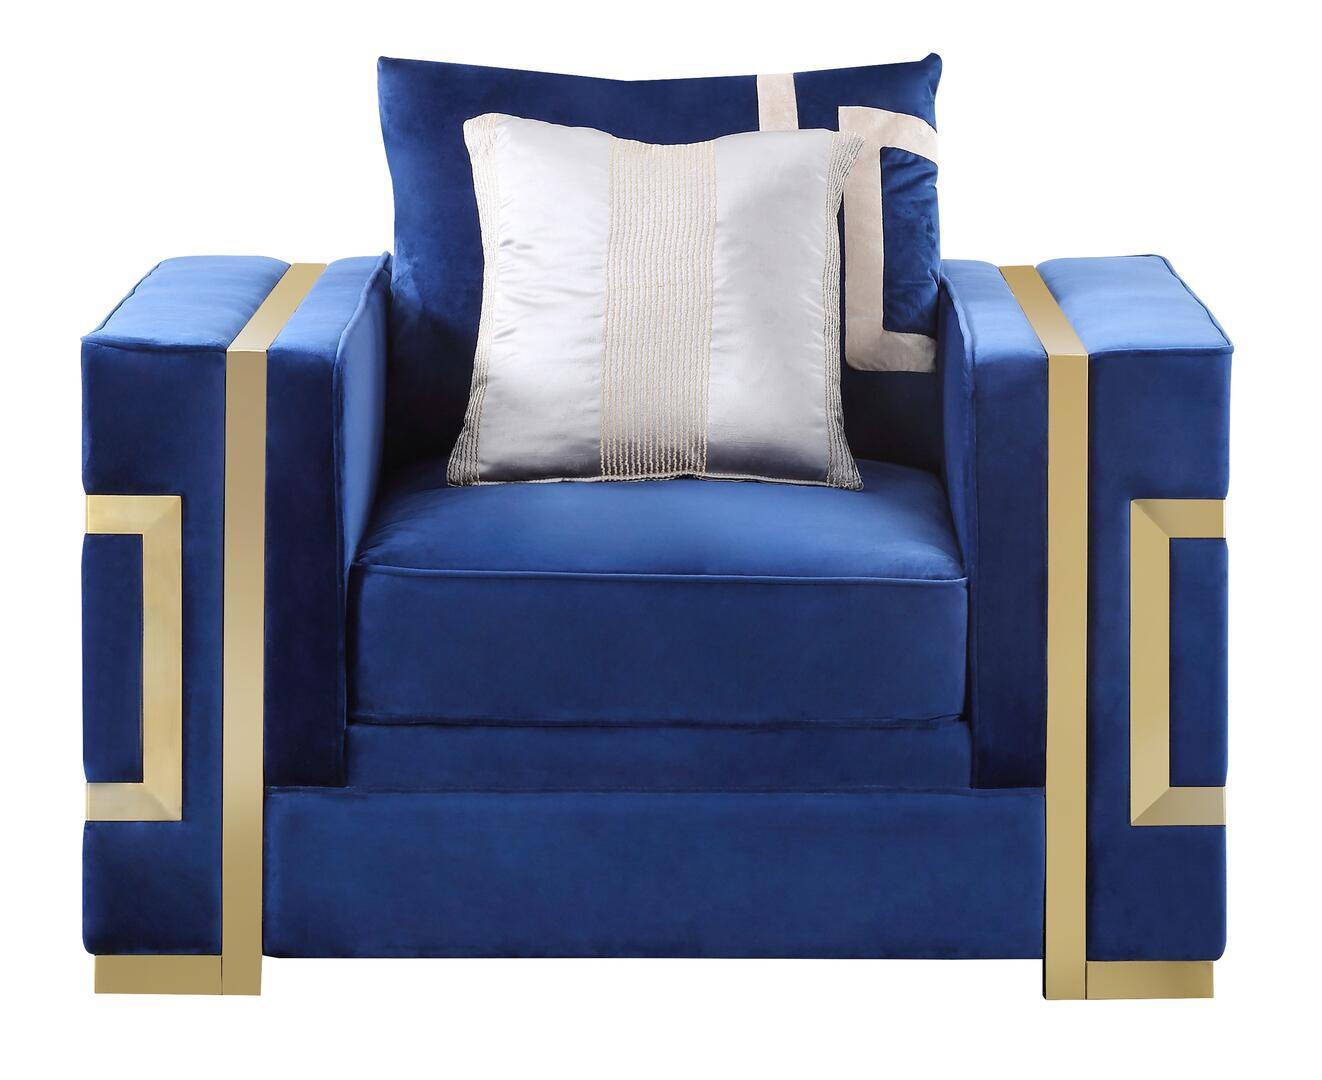 Transitional Arm Chairs Lawrence 30367BLLAW in Gold, Blue Fabric